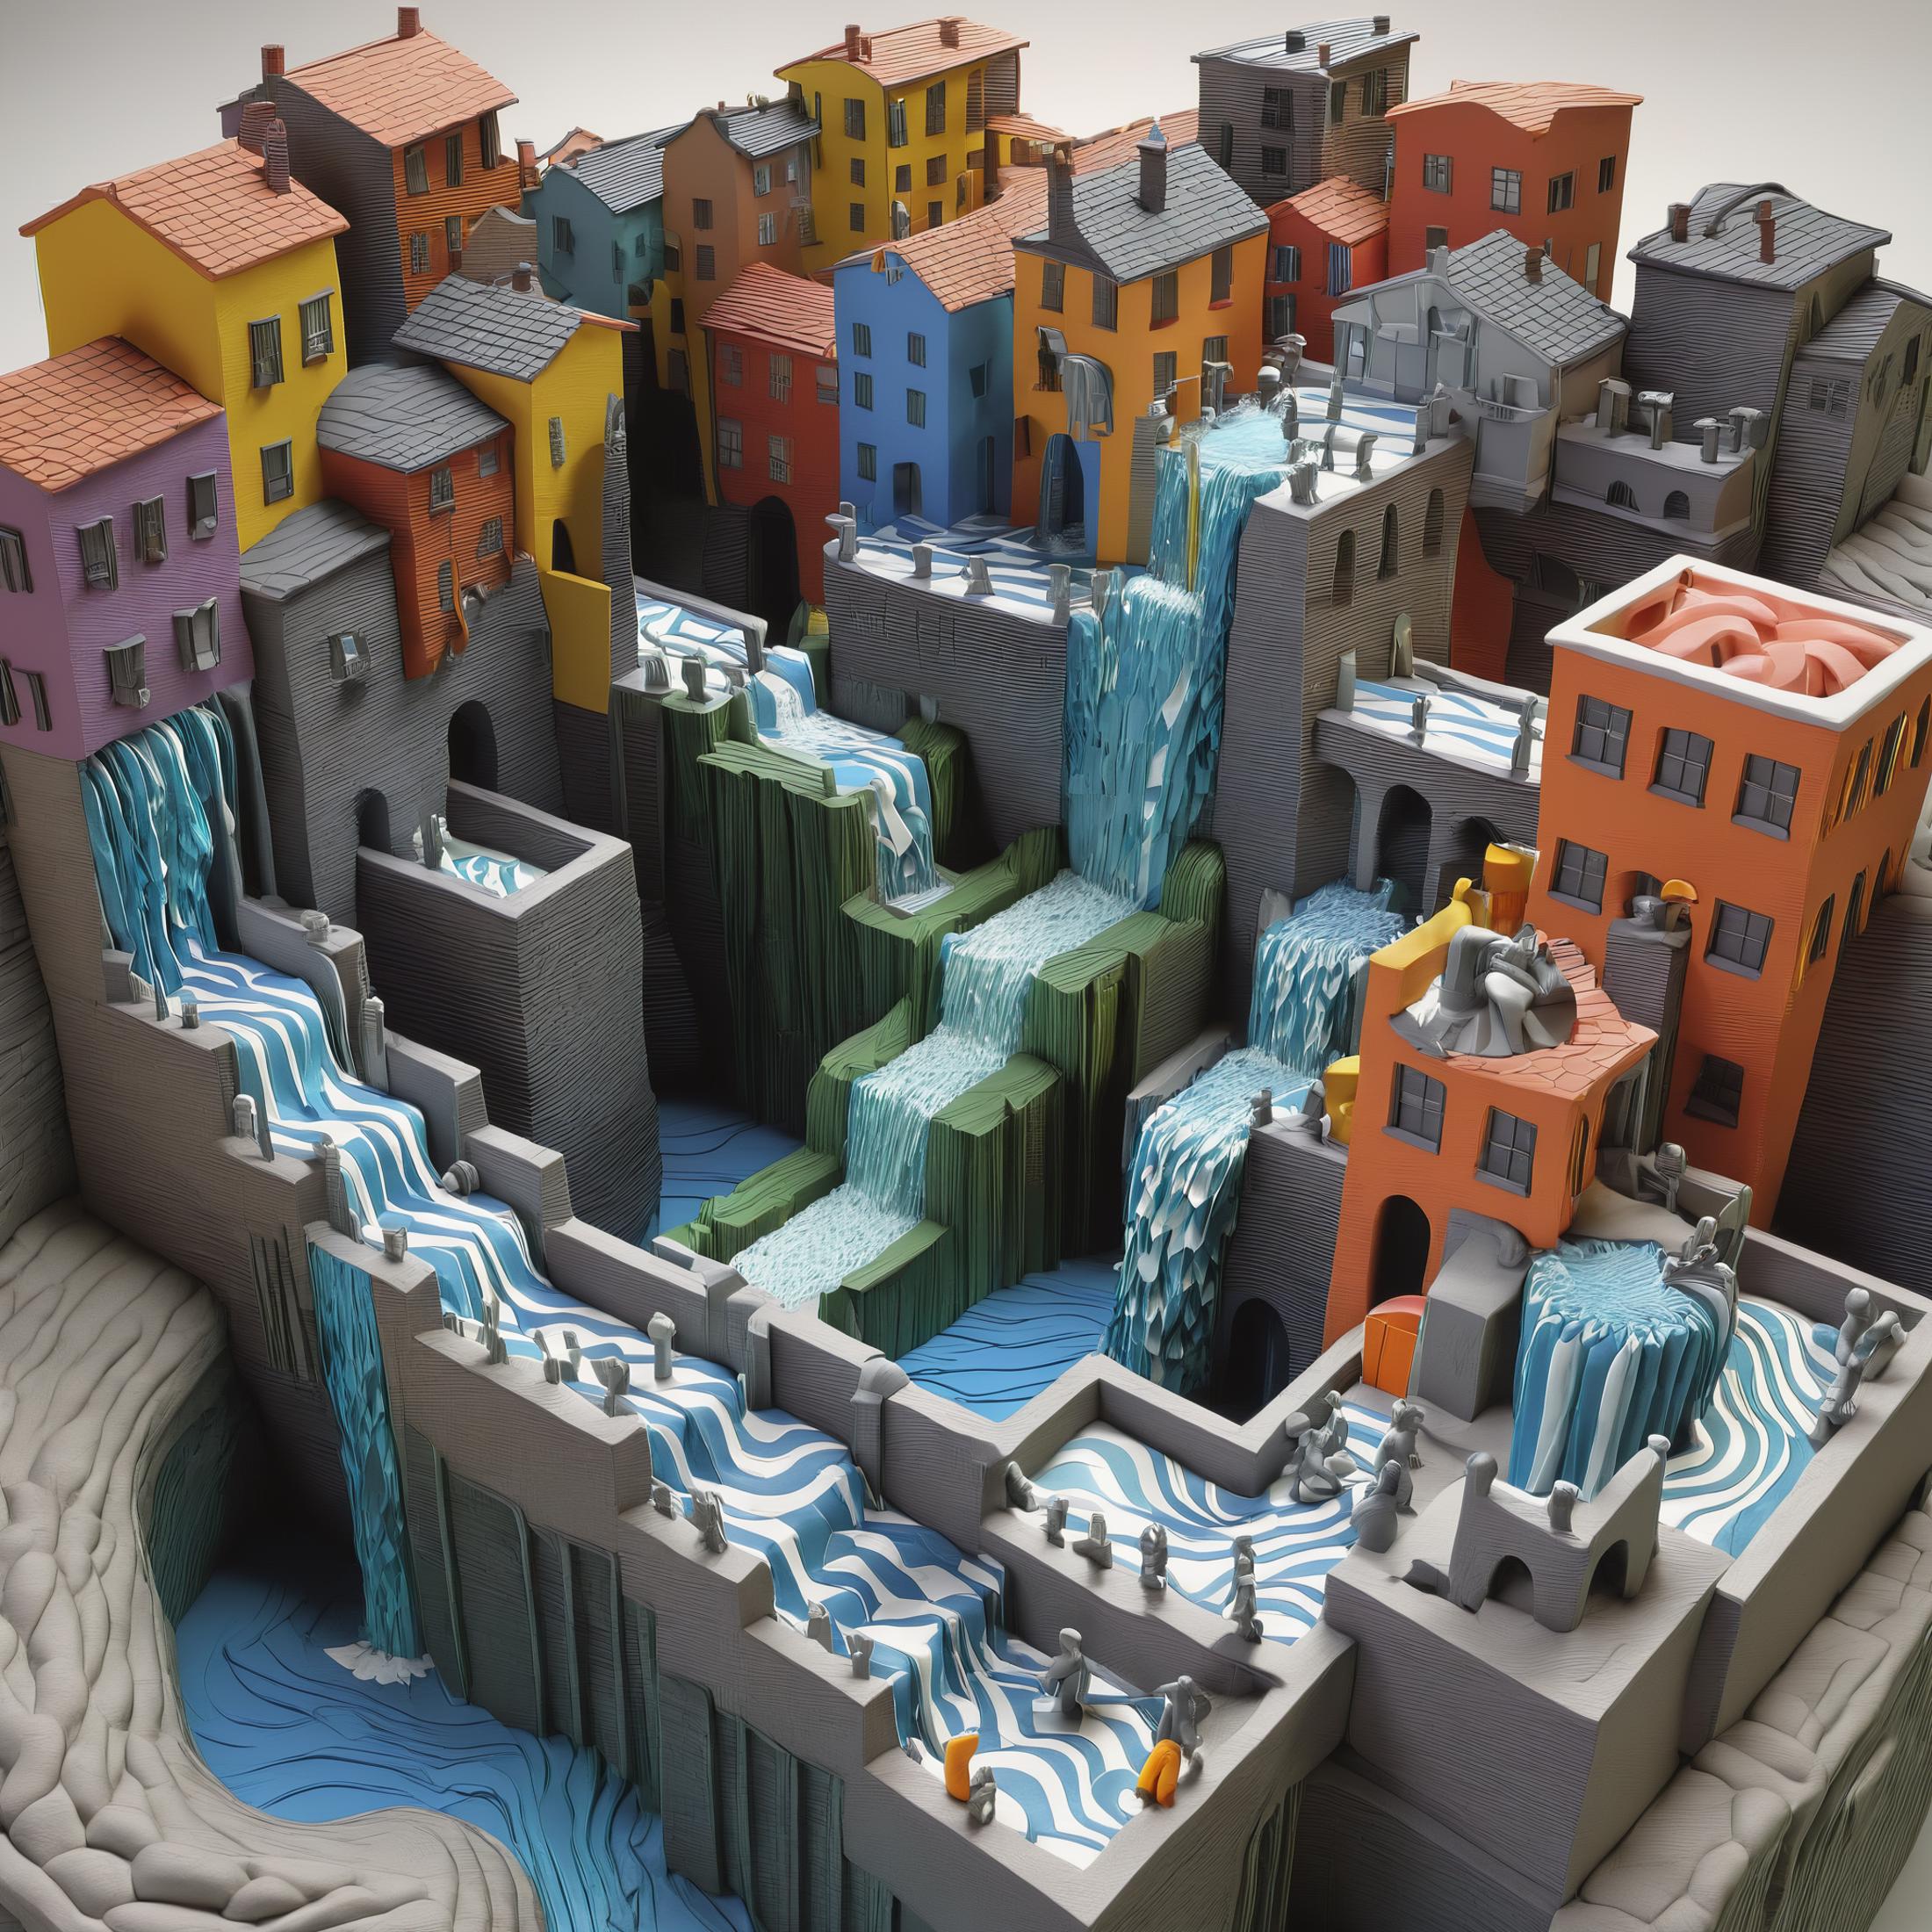 A Lego model of an ancient city with water flowing through it.